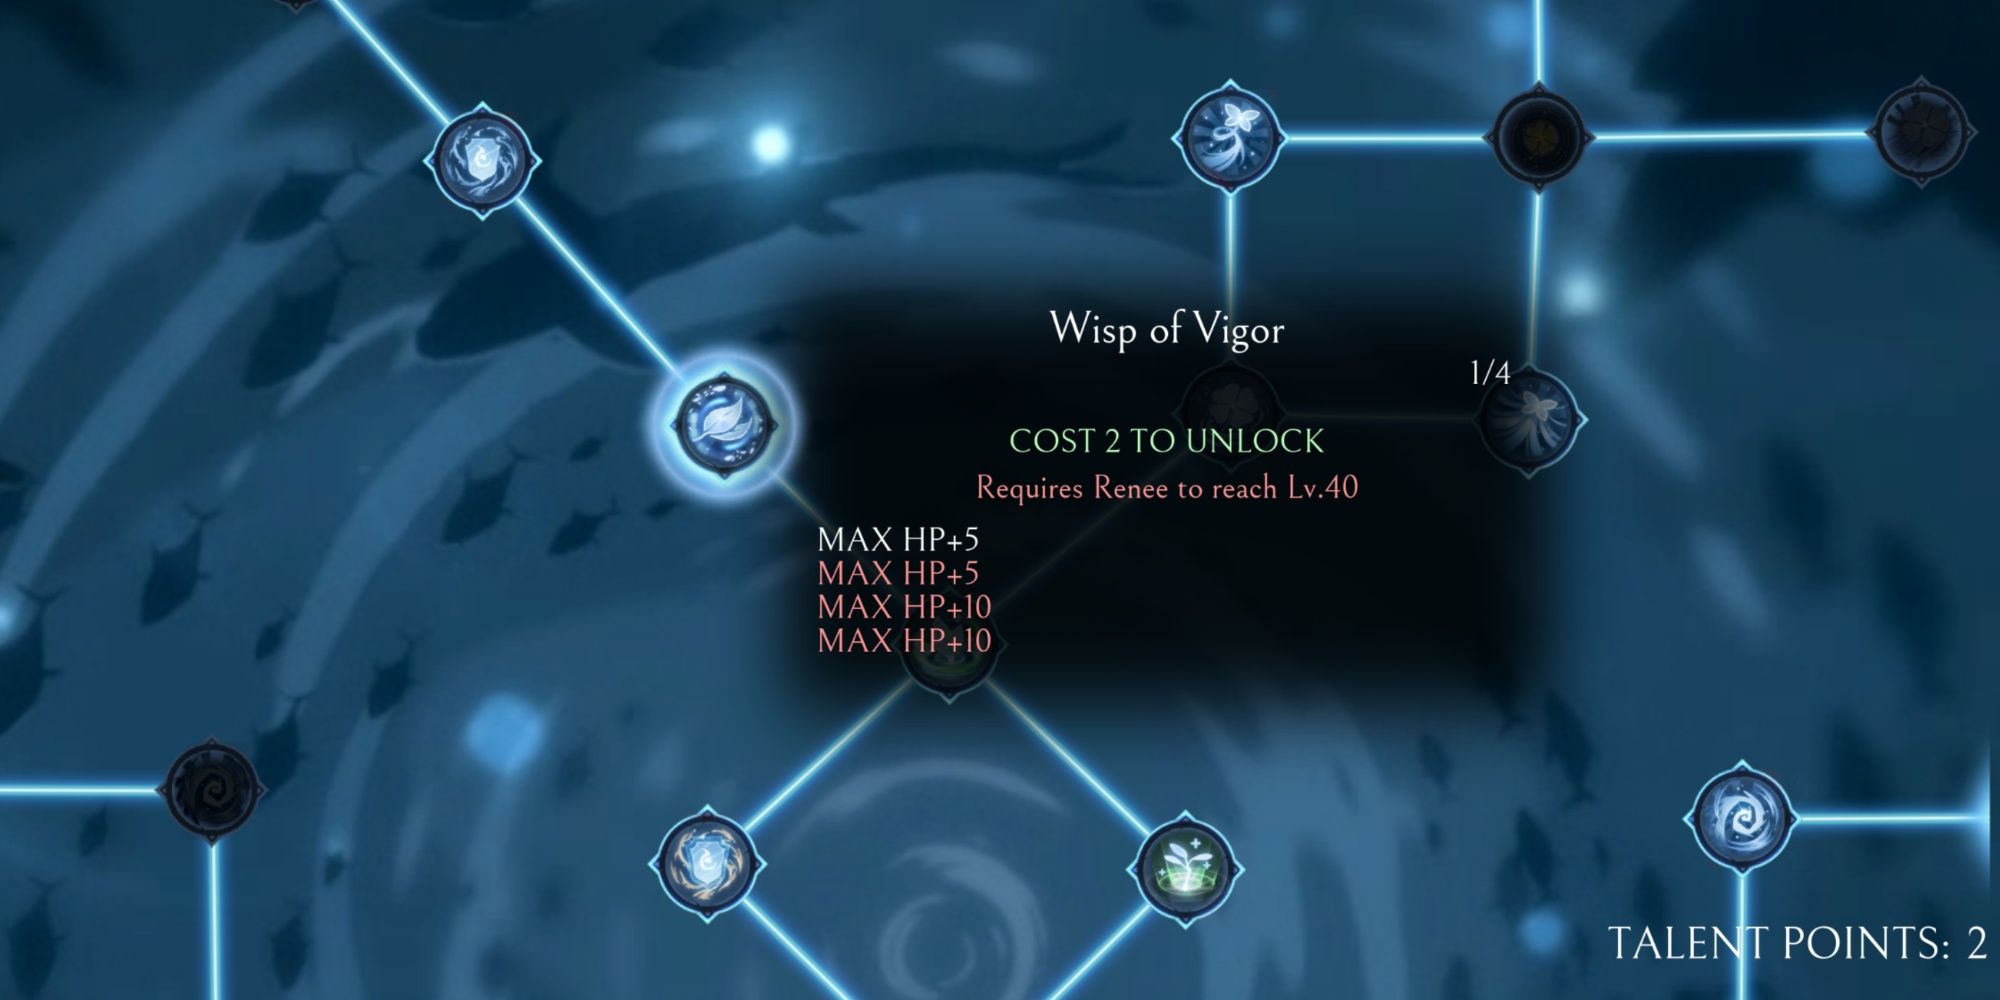 The Wisp of Vigor Talent in Afterimage that increases your Max HP.